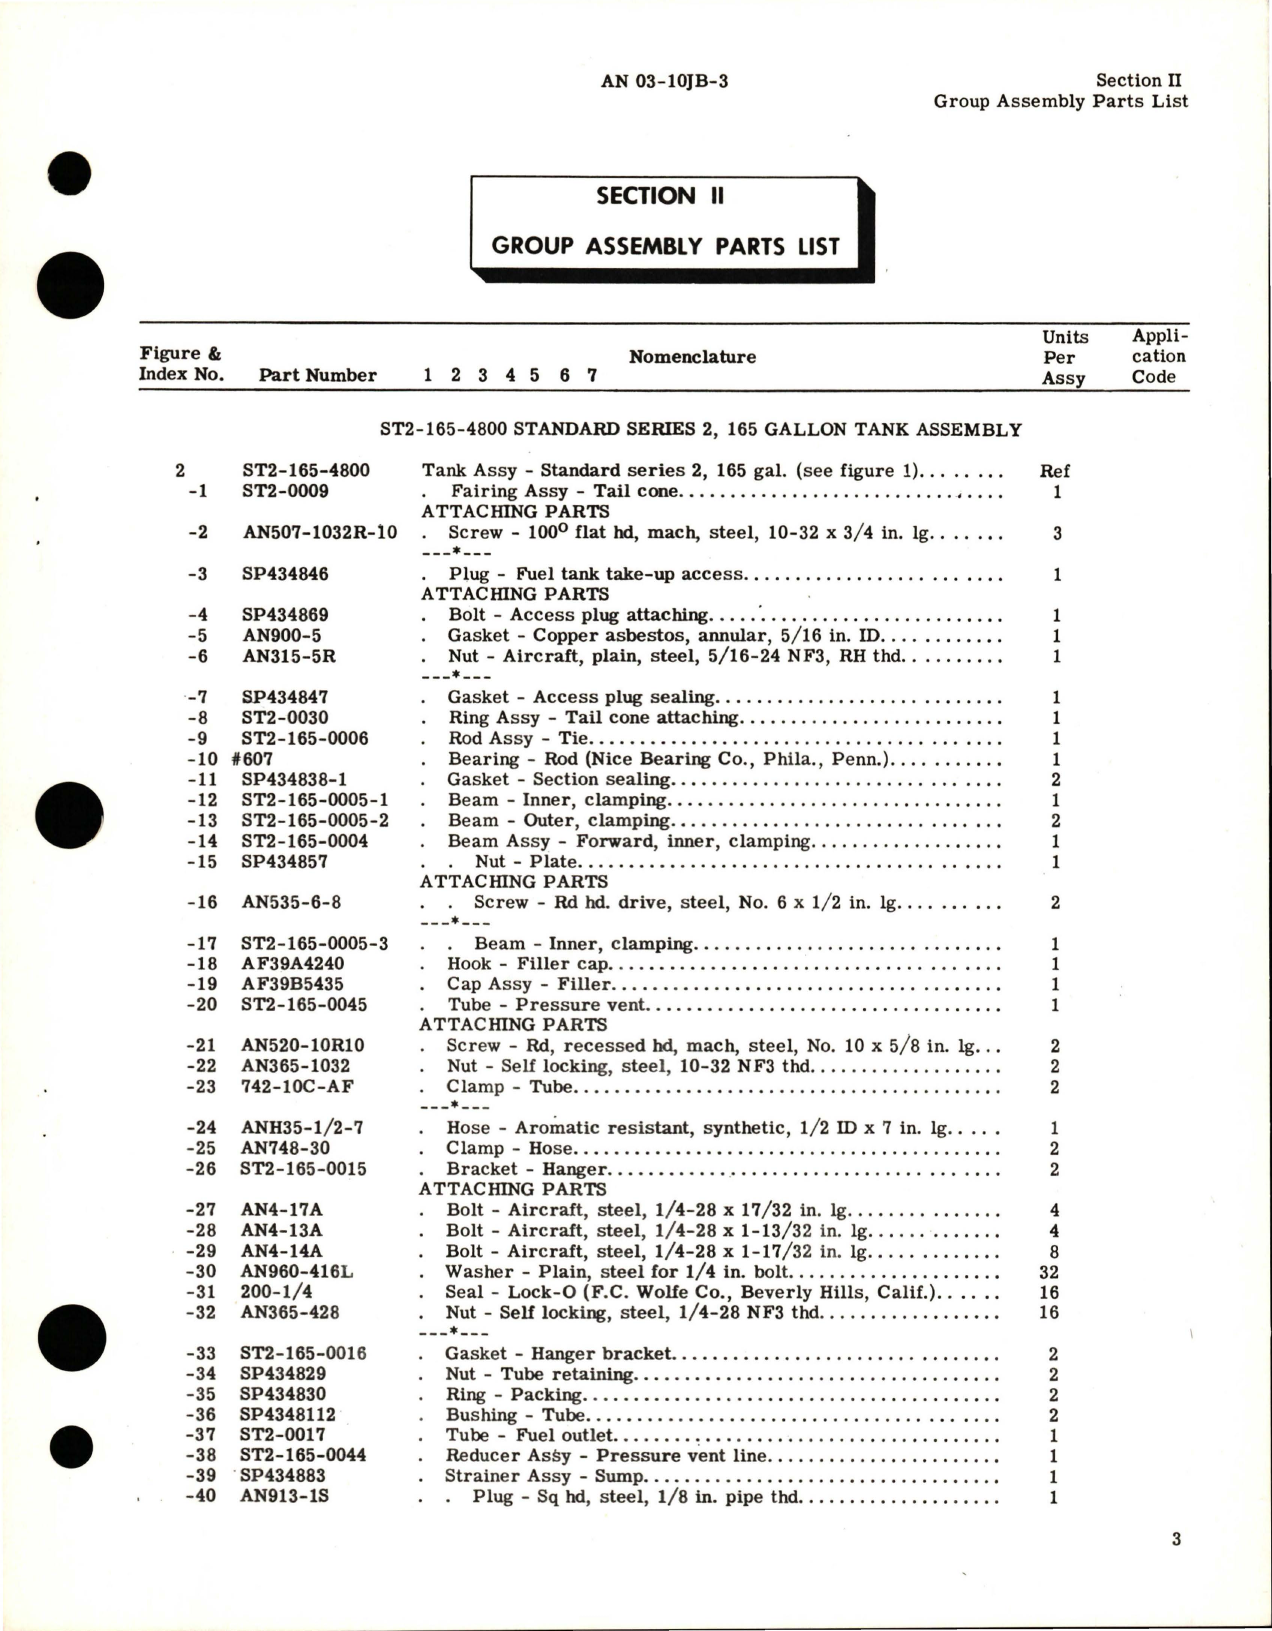 Sample page 5 from AirCorps Library document: Parts Catalog for External Jettison Fuel Tank - 165 Gal Capacity - Parts ST2-165-4800 and ST2-165-4803